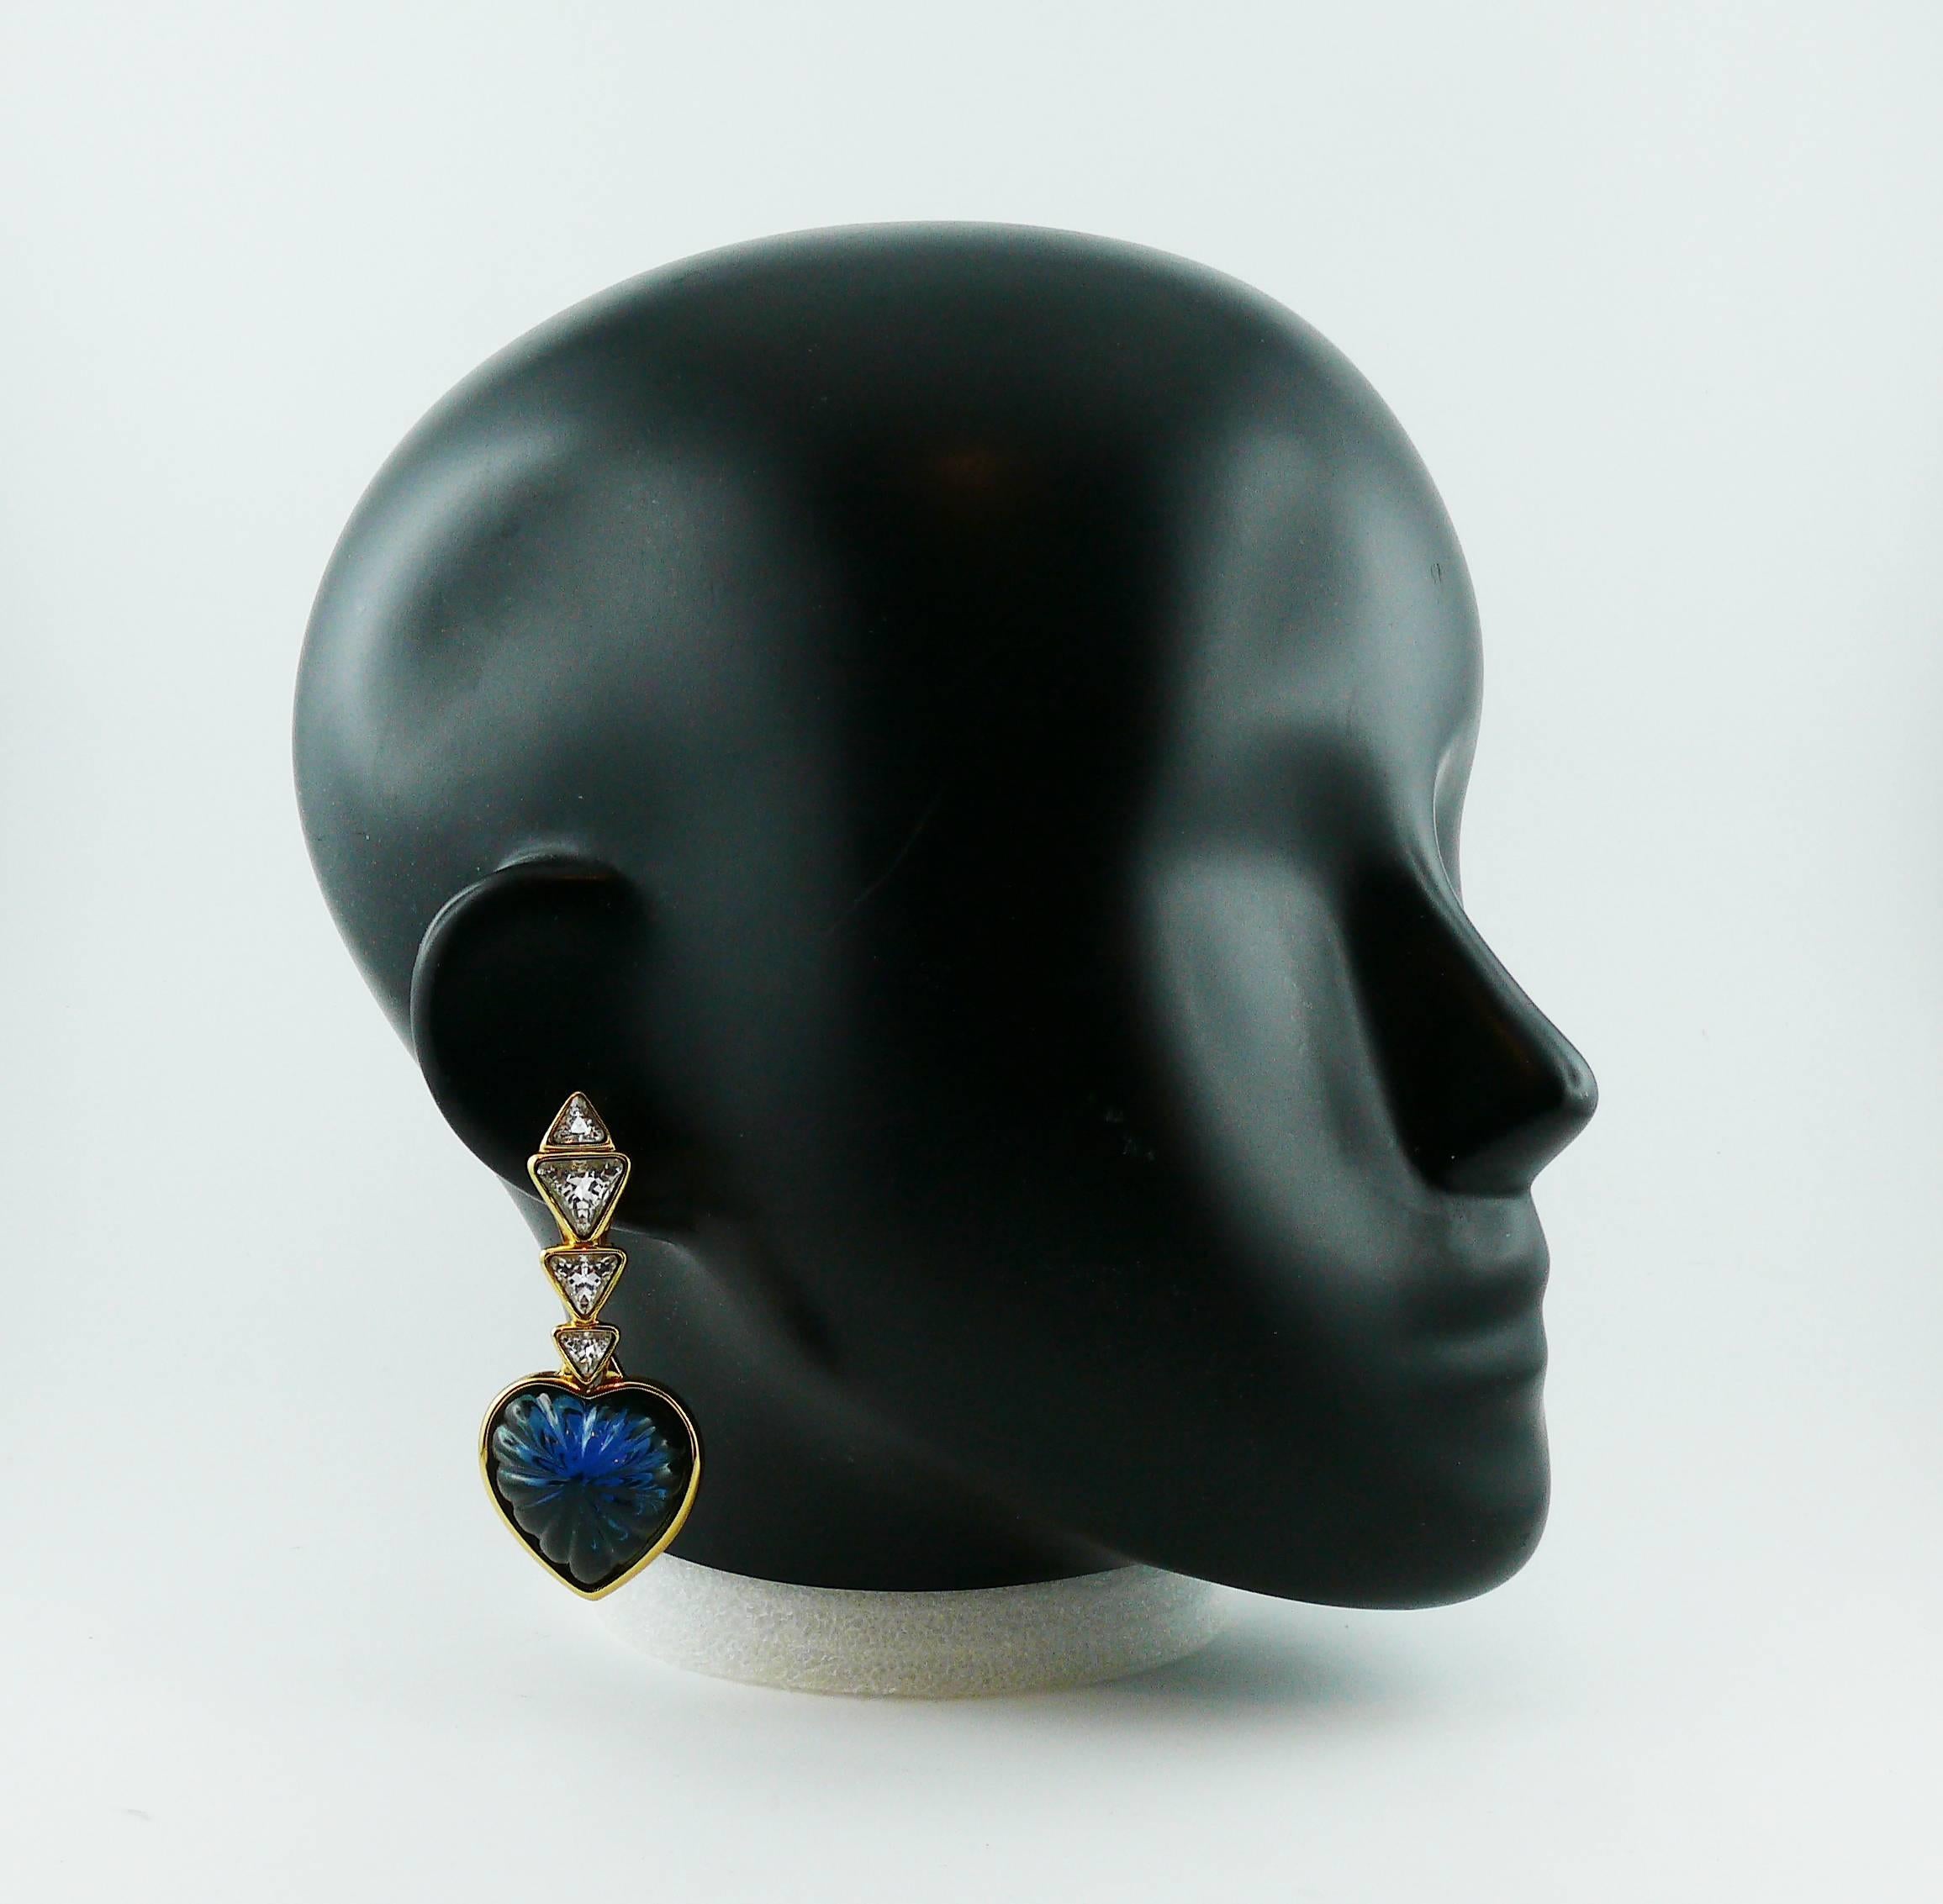 YVES SAINT LAURENT vintage dangling earrings (clip-on) featuring a massive faux sapphire resin heart and clear crystals in a gold toned setting.

Marked YSL Made in France.

Indicative measurements : height approx. 6.7 cm (2.64 inches) / max. width